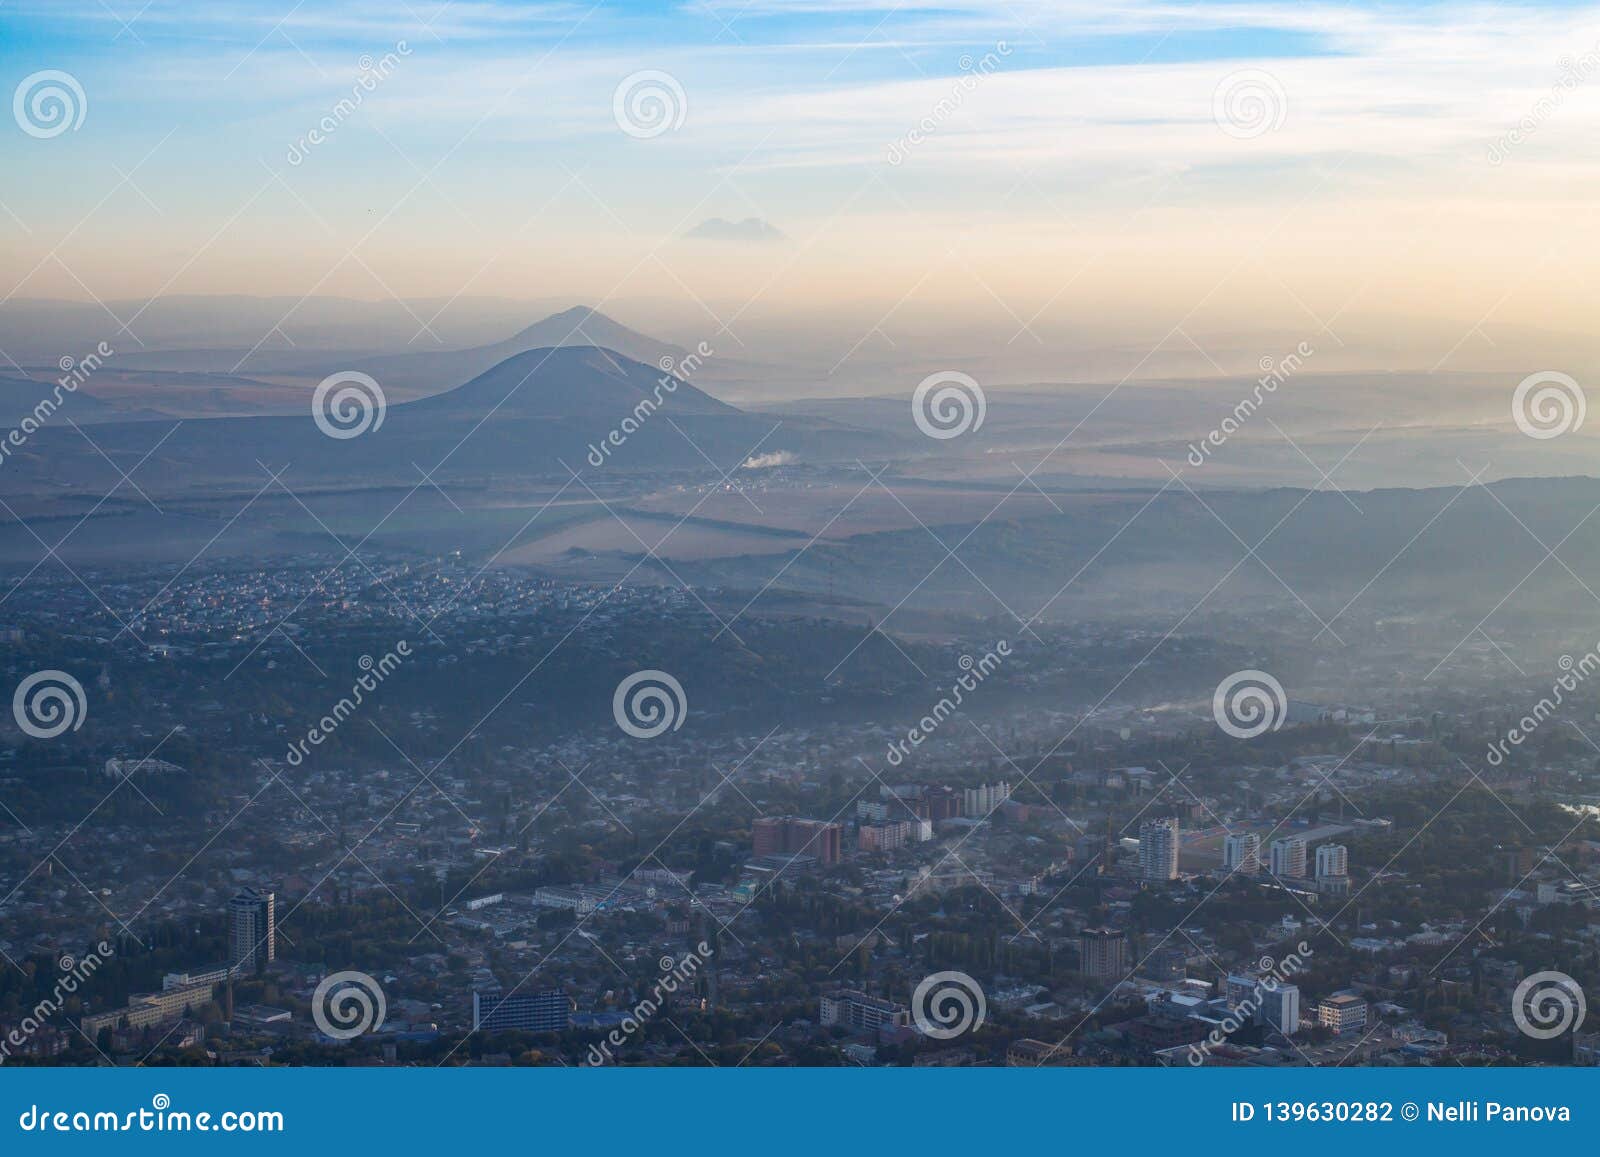 beautiful city with mountain in the haze